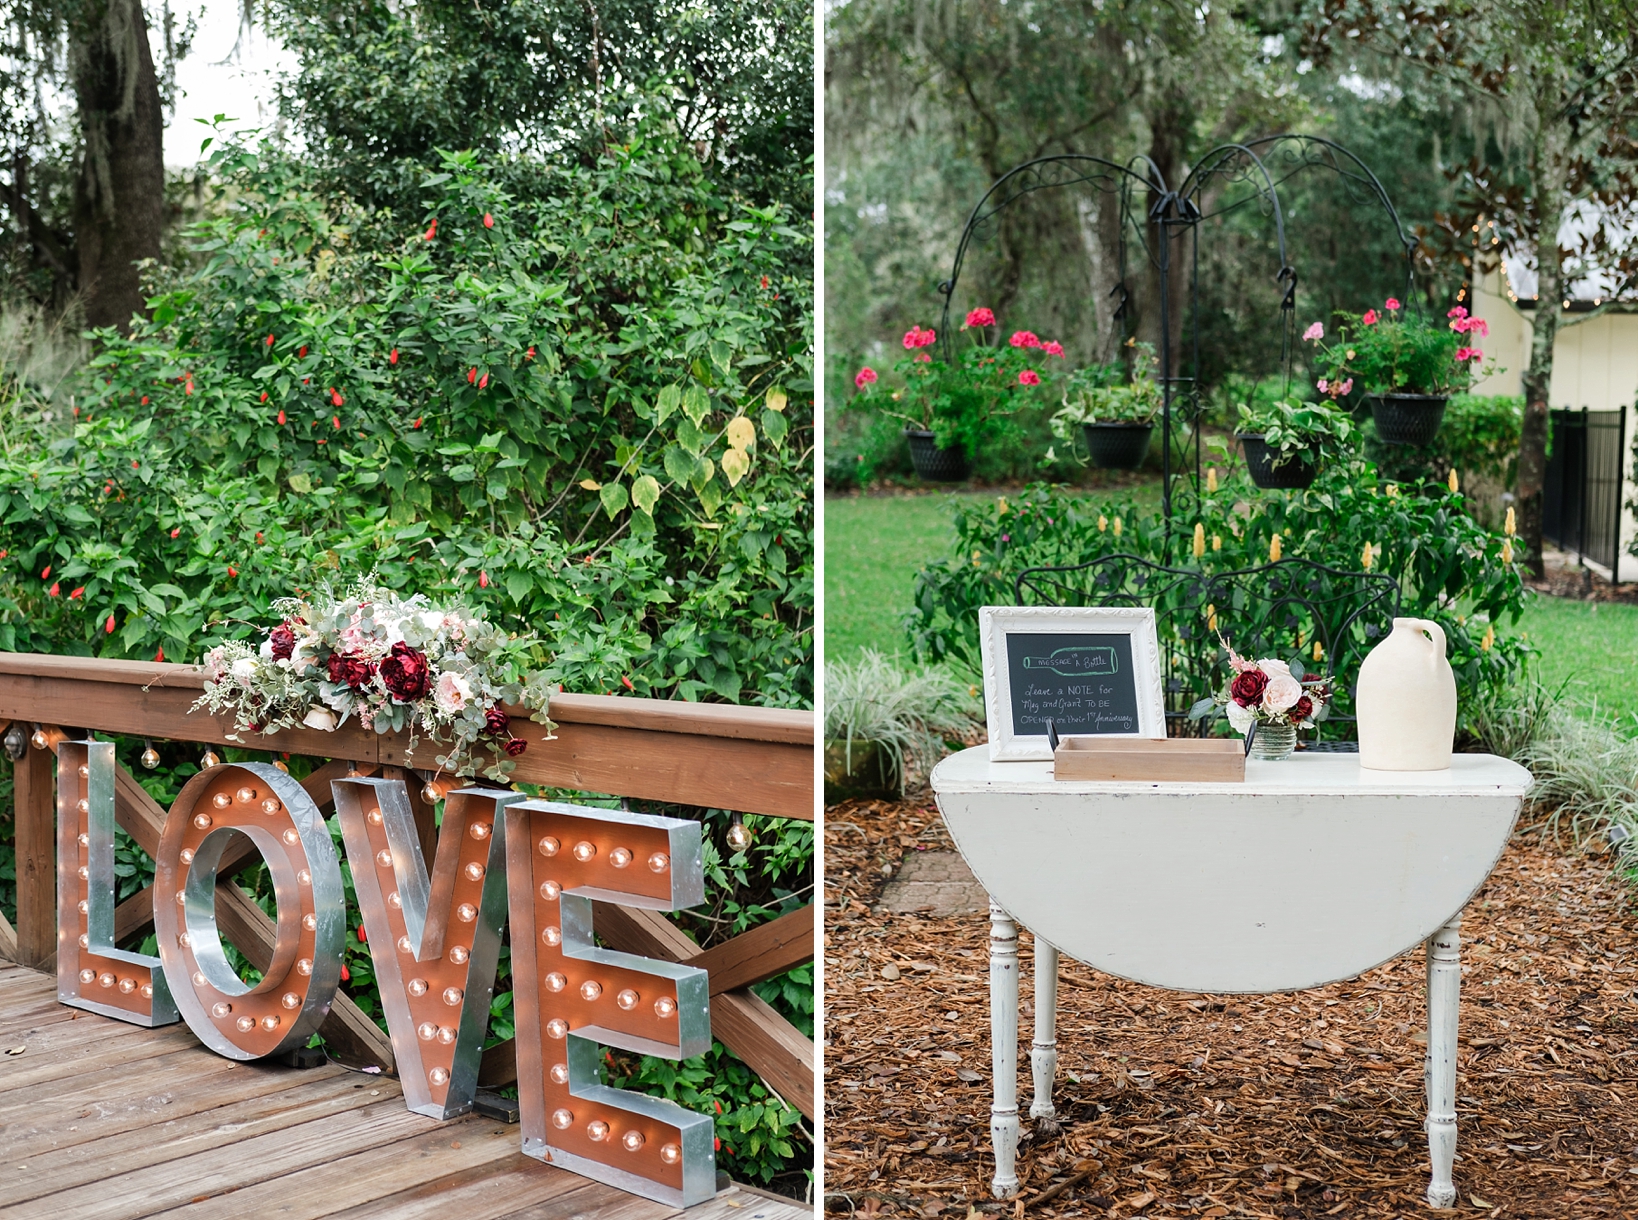 Reception decor such as a light up "Love" sign covered in florals